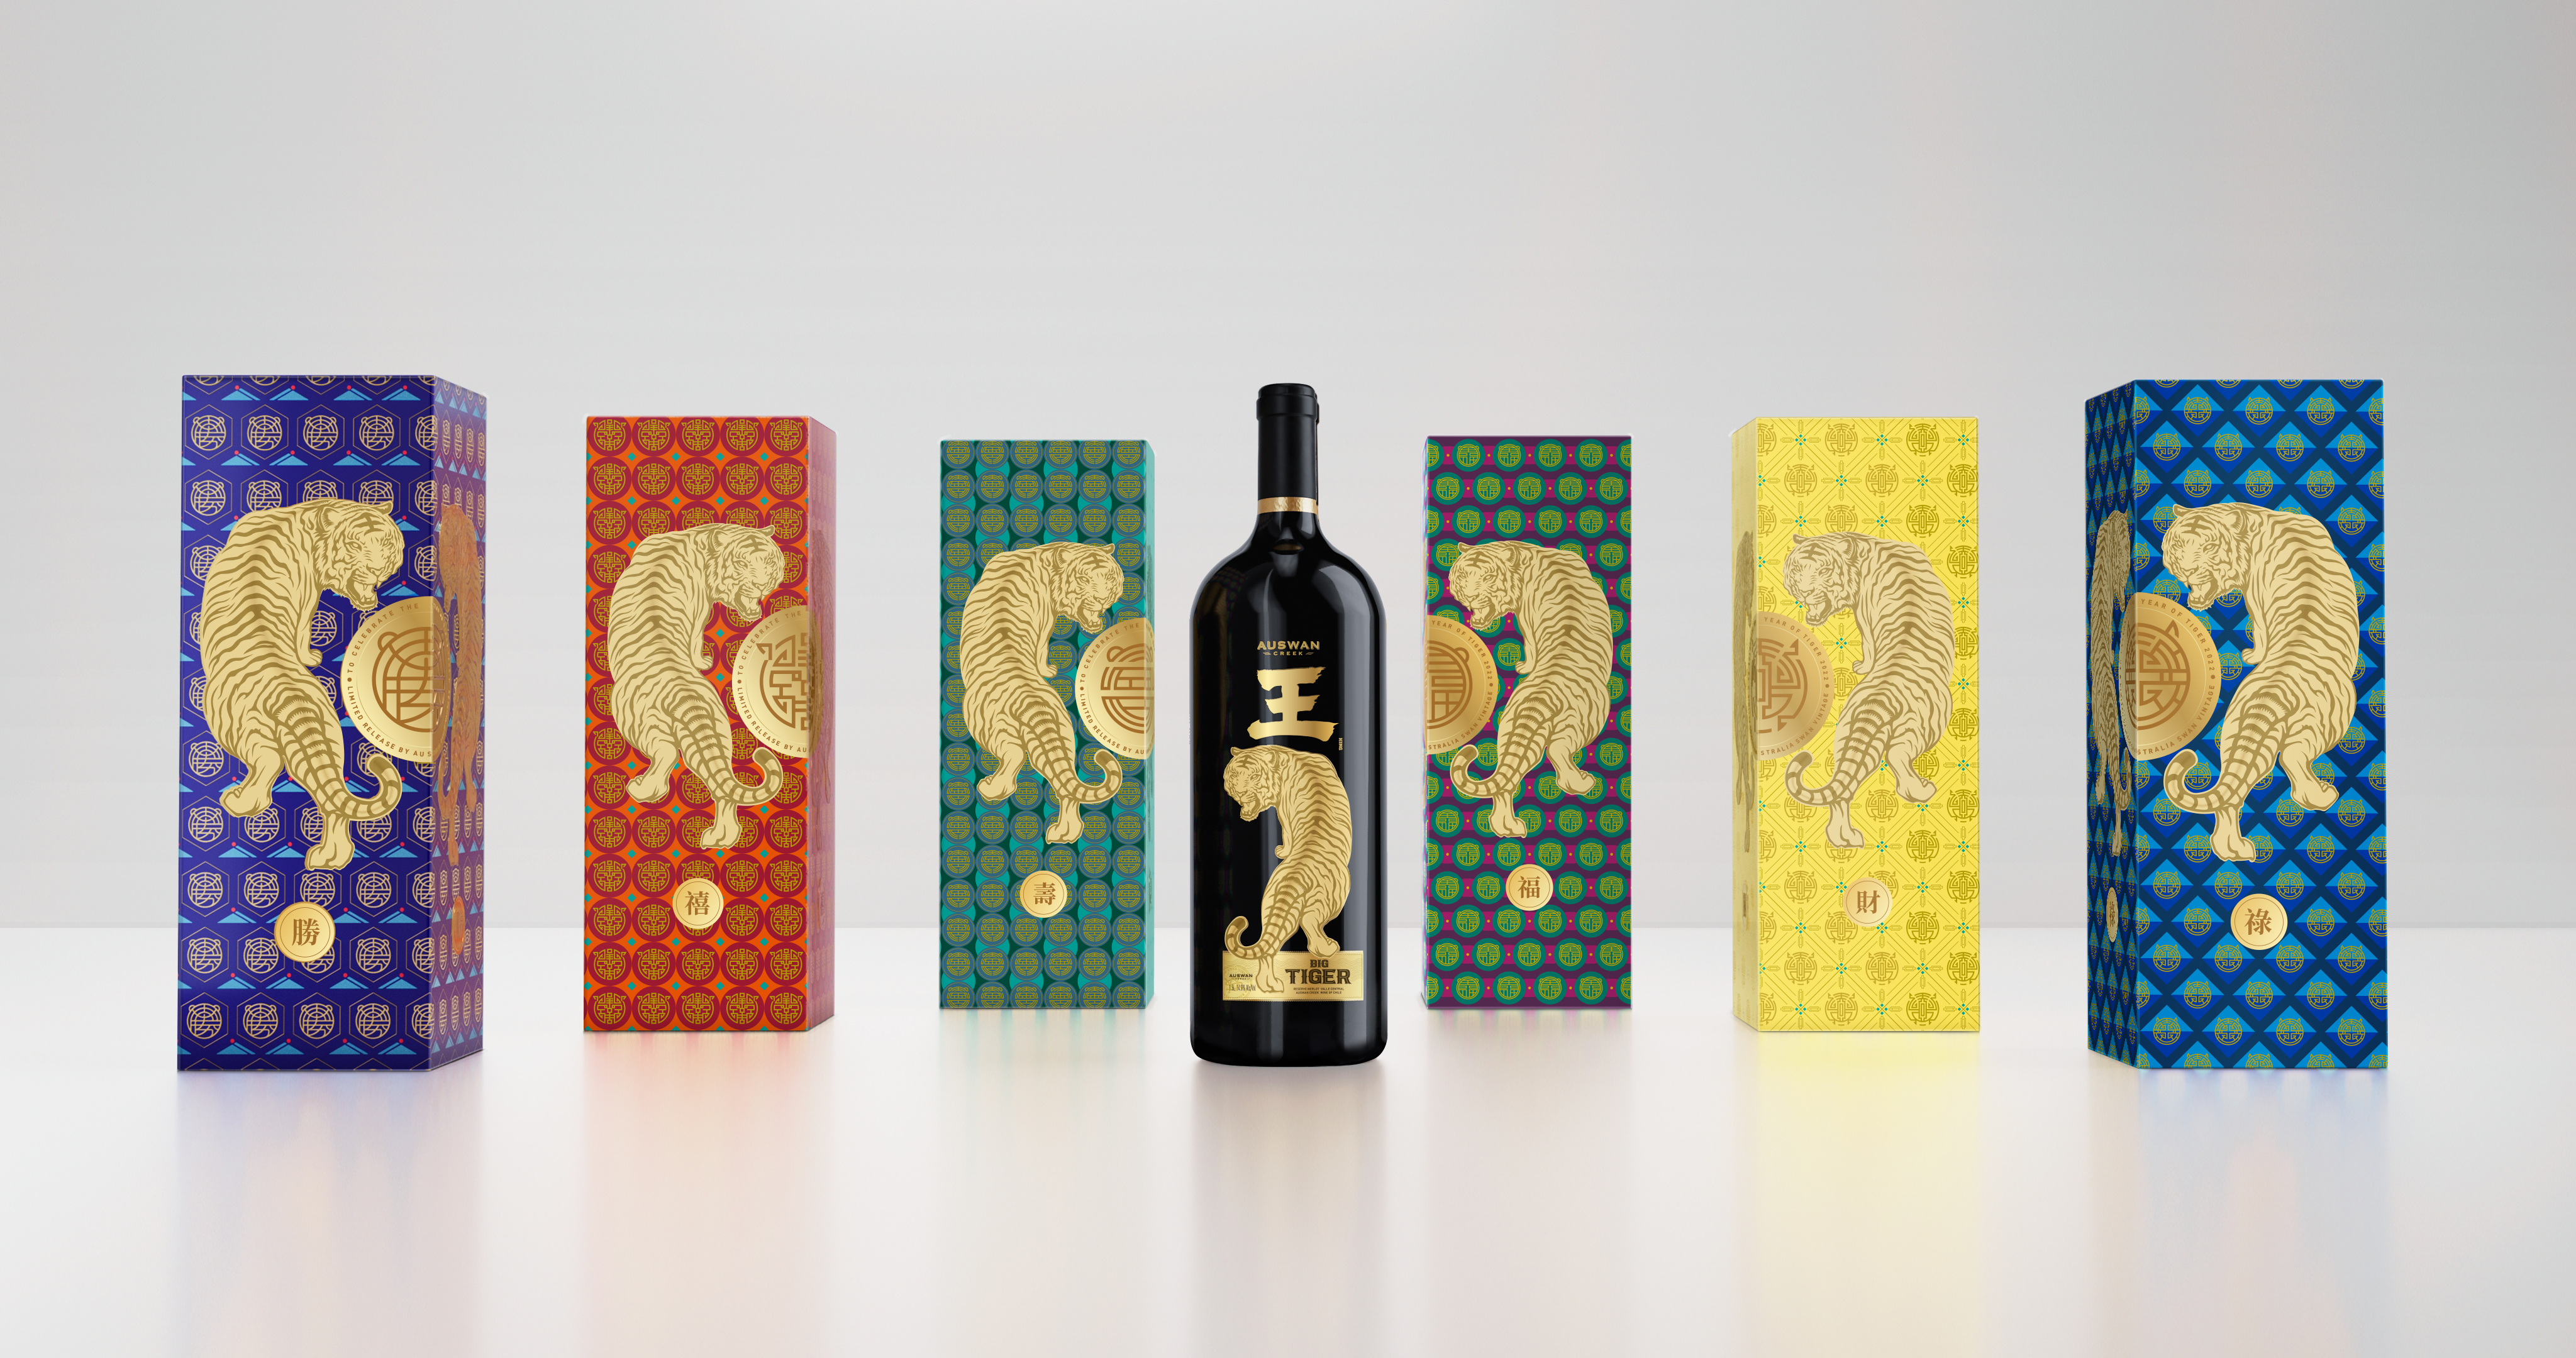 Zodiac Wine For The Year of Tiger